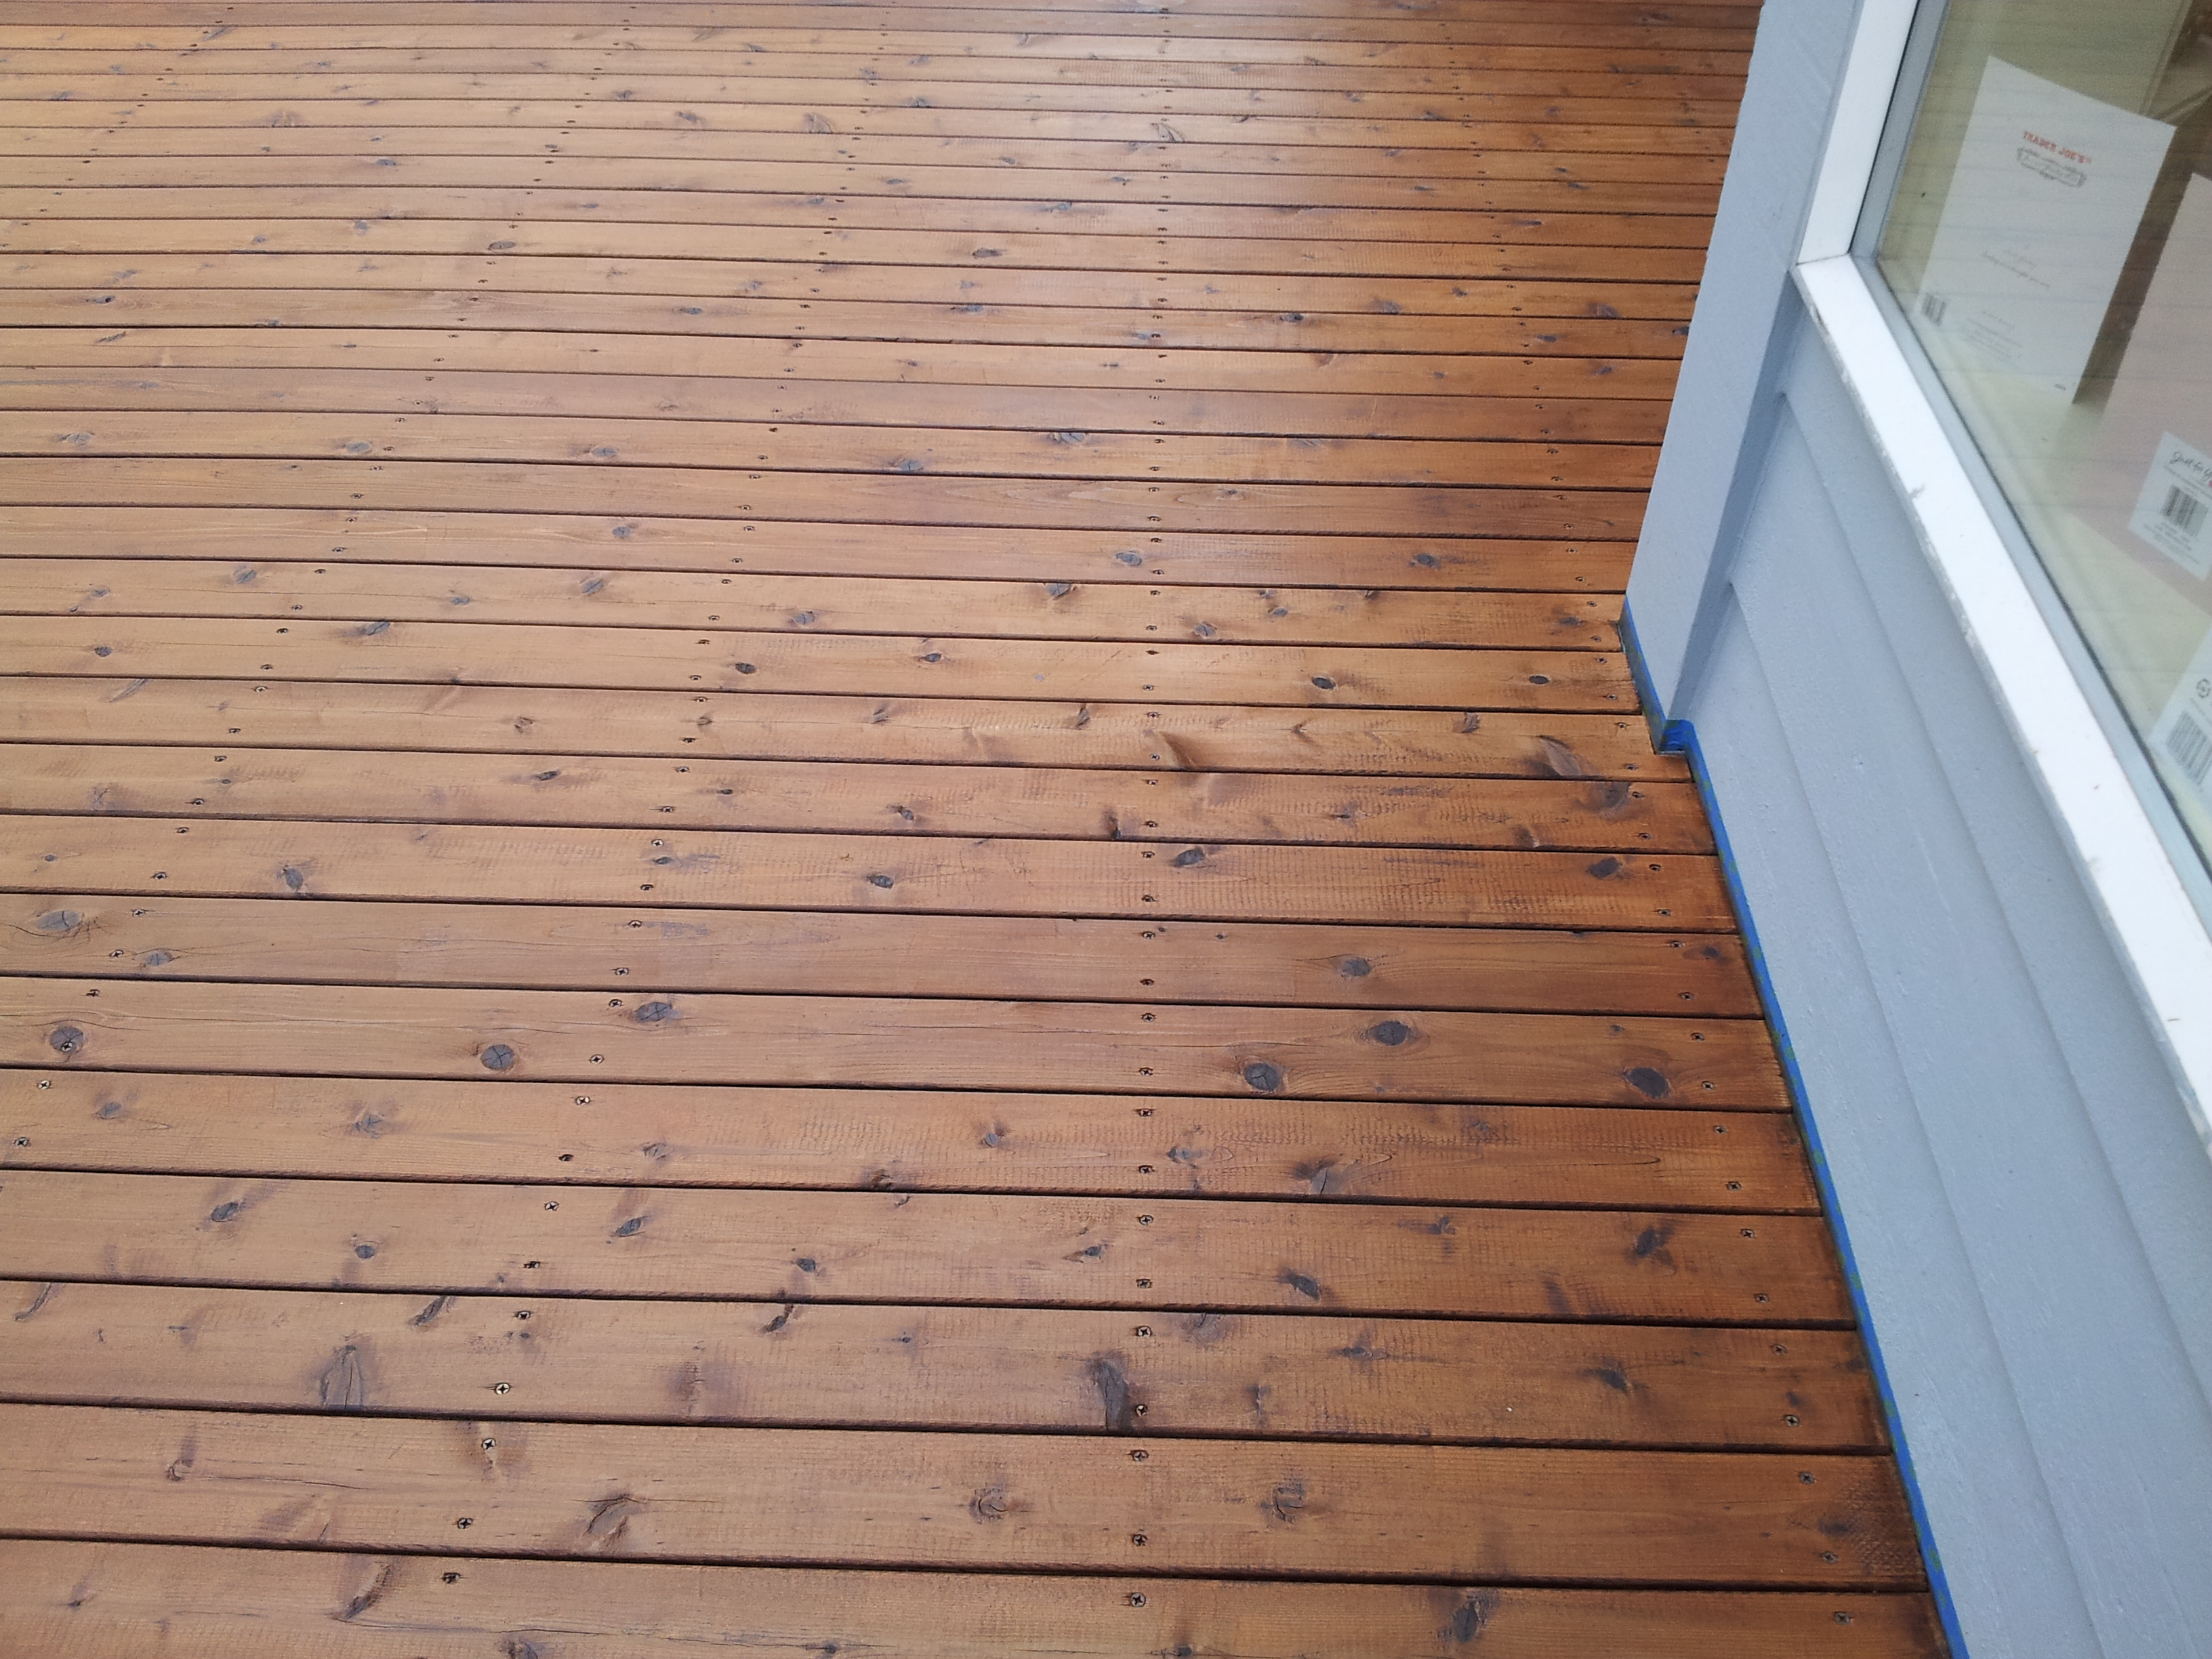 Oil Based Deck Stains 2018 Best Deck Stain Reviews Ratings intended for measurements 3264 X 2448